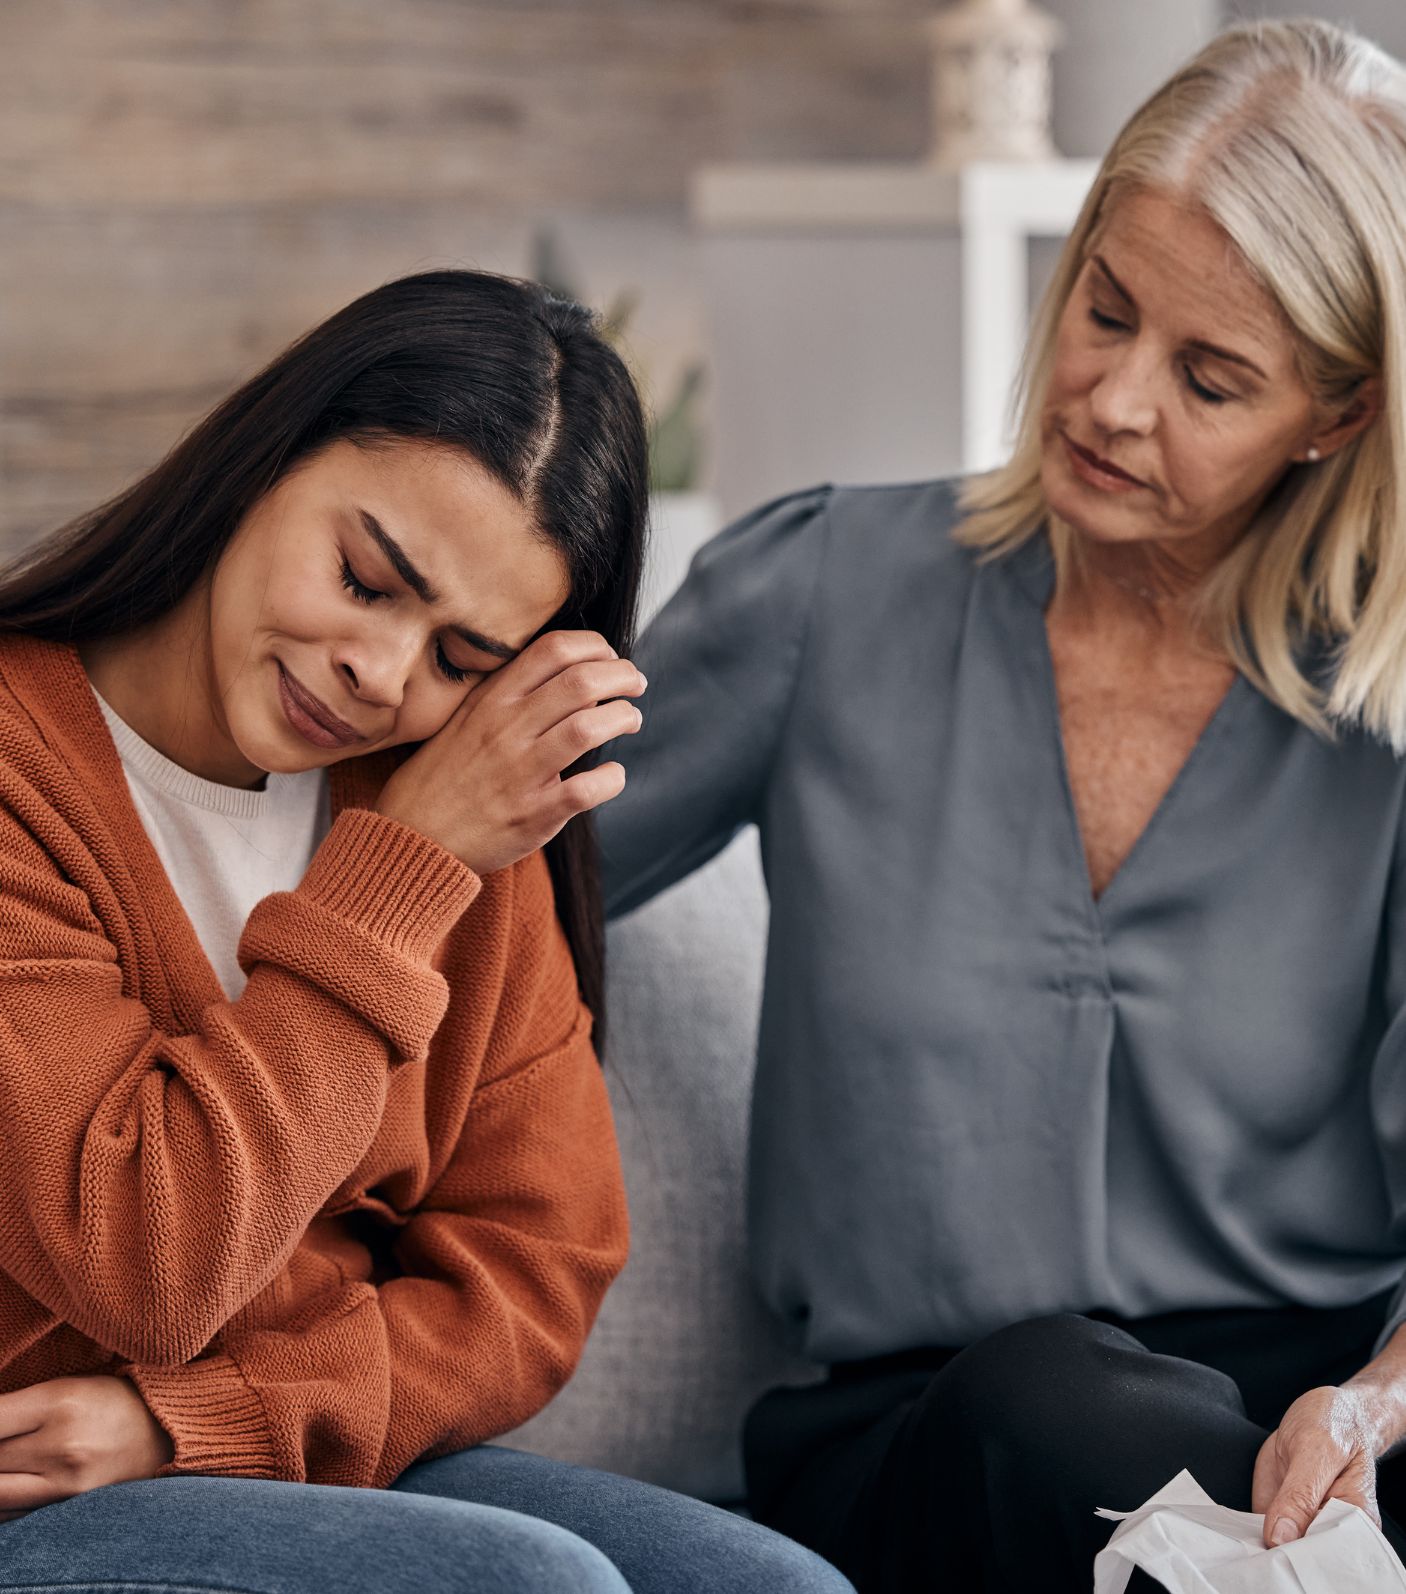 A woman crying and wiping tears as another woman puts her arm on her back to offer support. Are you in the aftermath of infidelity trying to end an affair? You are not alone. Our Affair recovery experts can help you end your affair, save your relationship and rebuild trust. Schedule a free consultation to learn more about our Infidelity Recovery program.